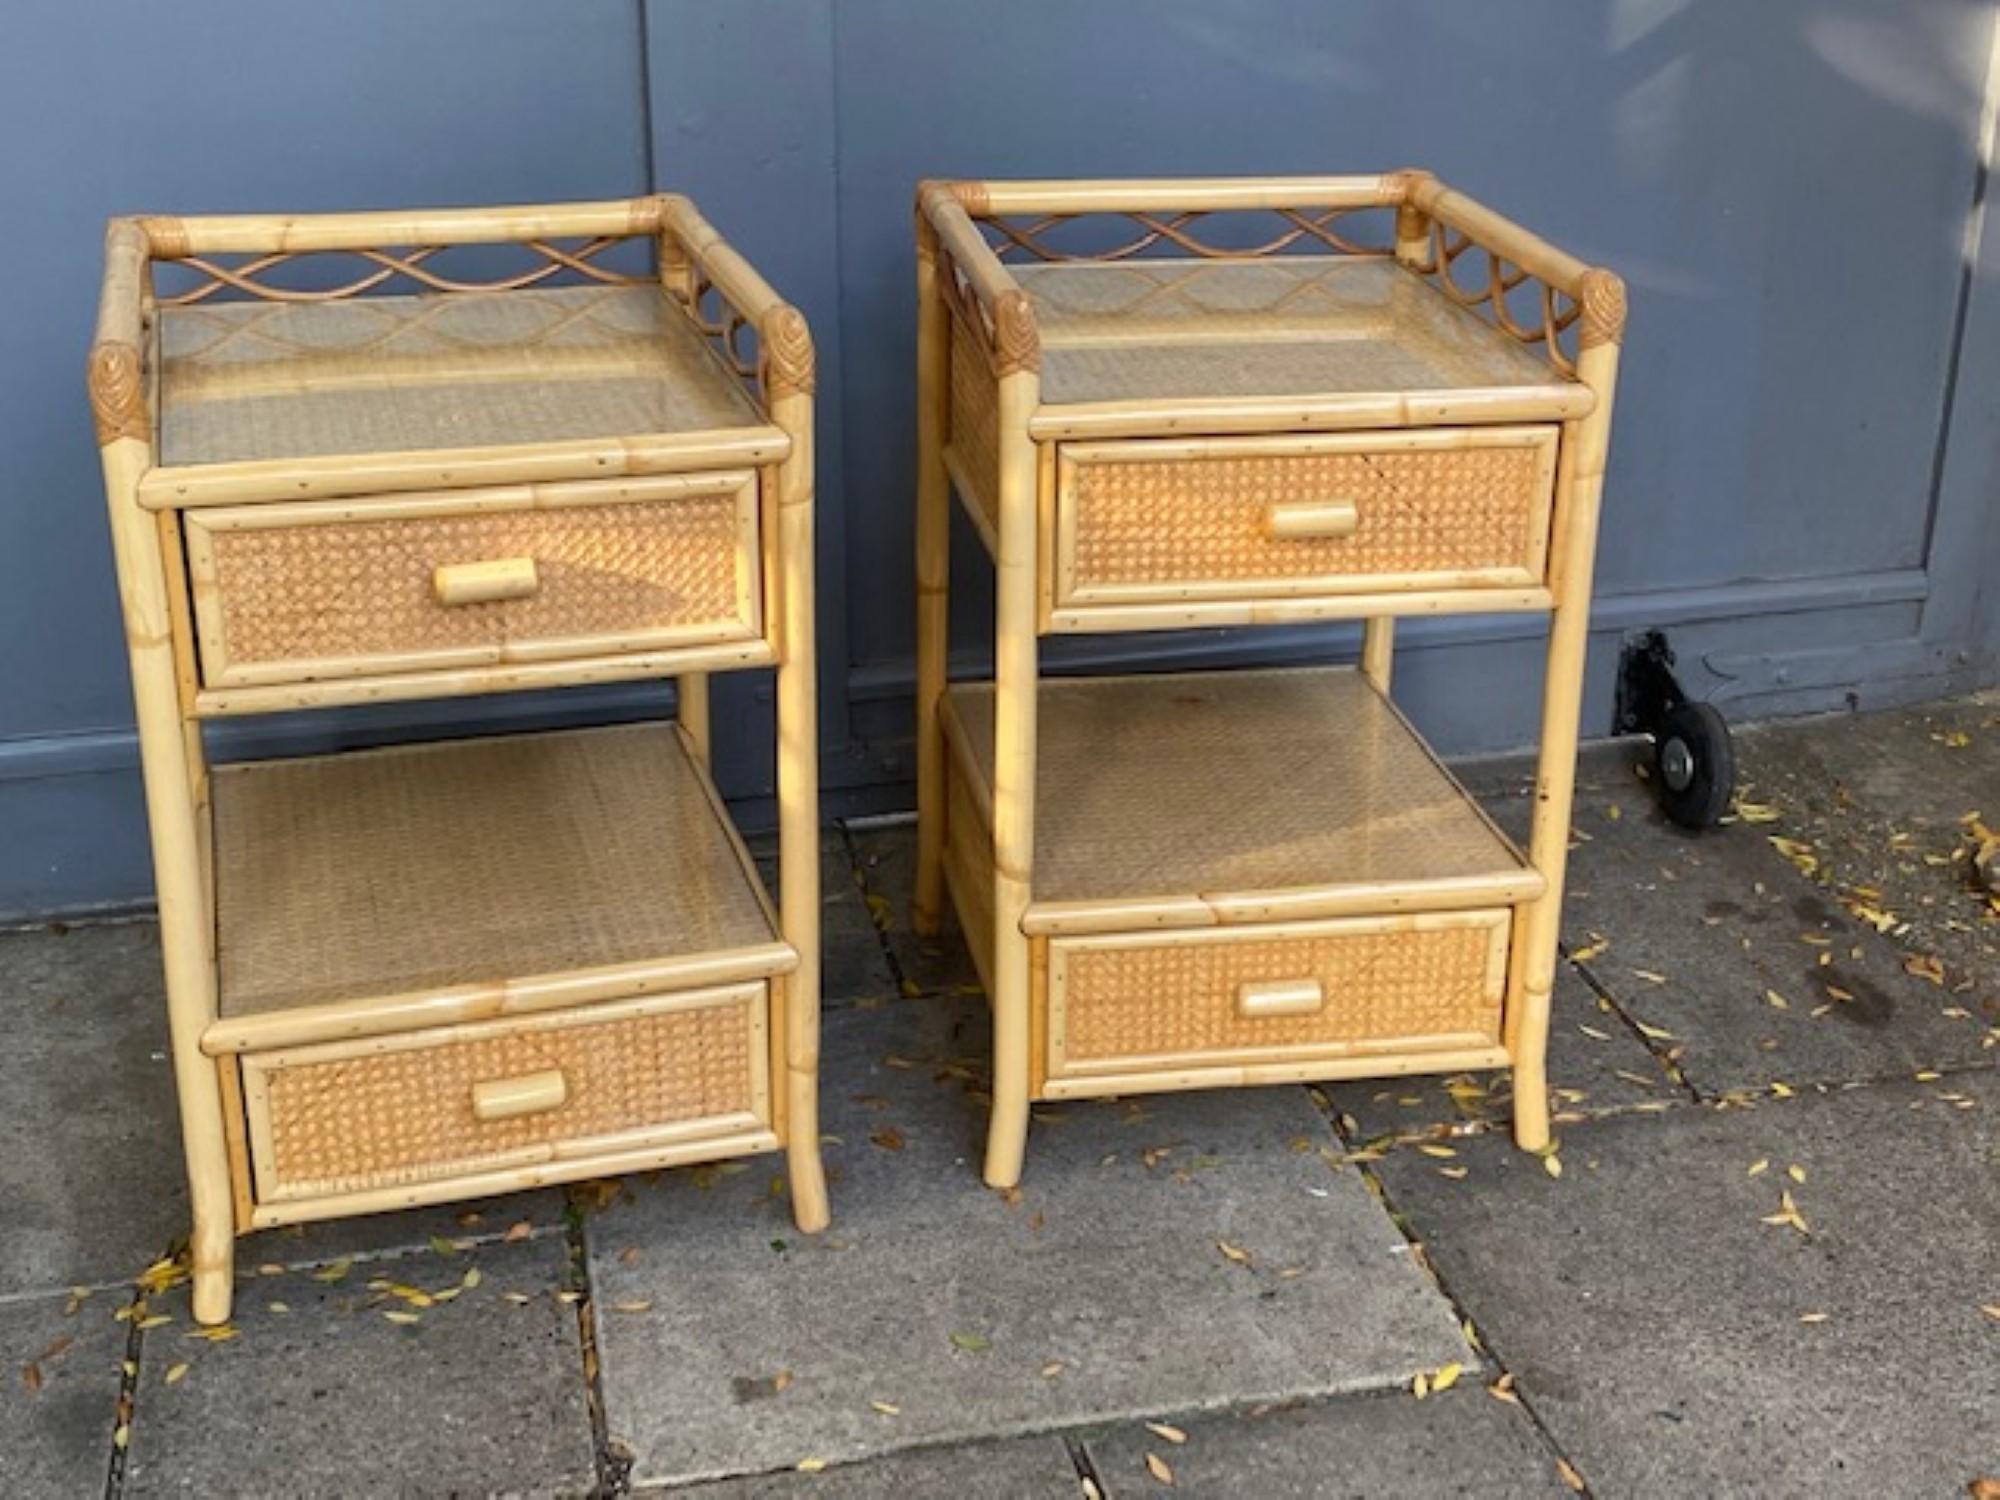 Italian Pair of MCM Rattan / Cane Nightstands / Bedside Tables, Angraves, English, 1970s For Sale